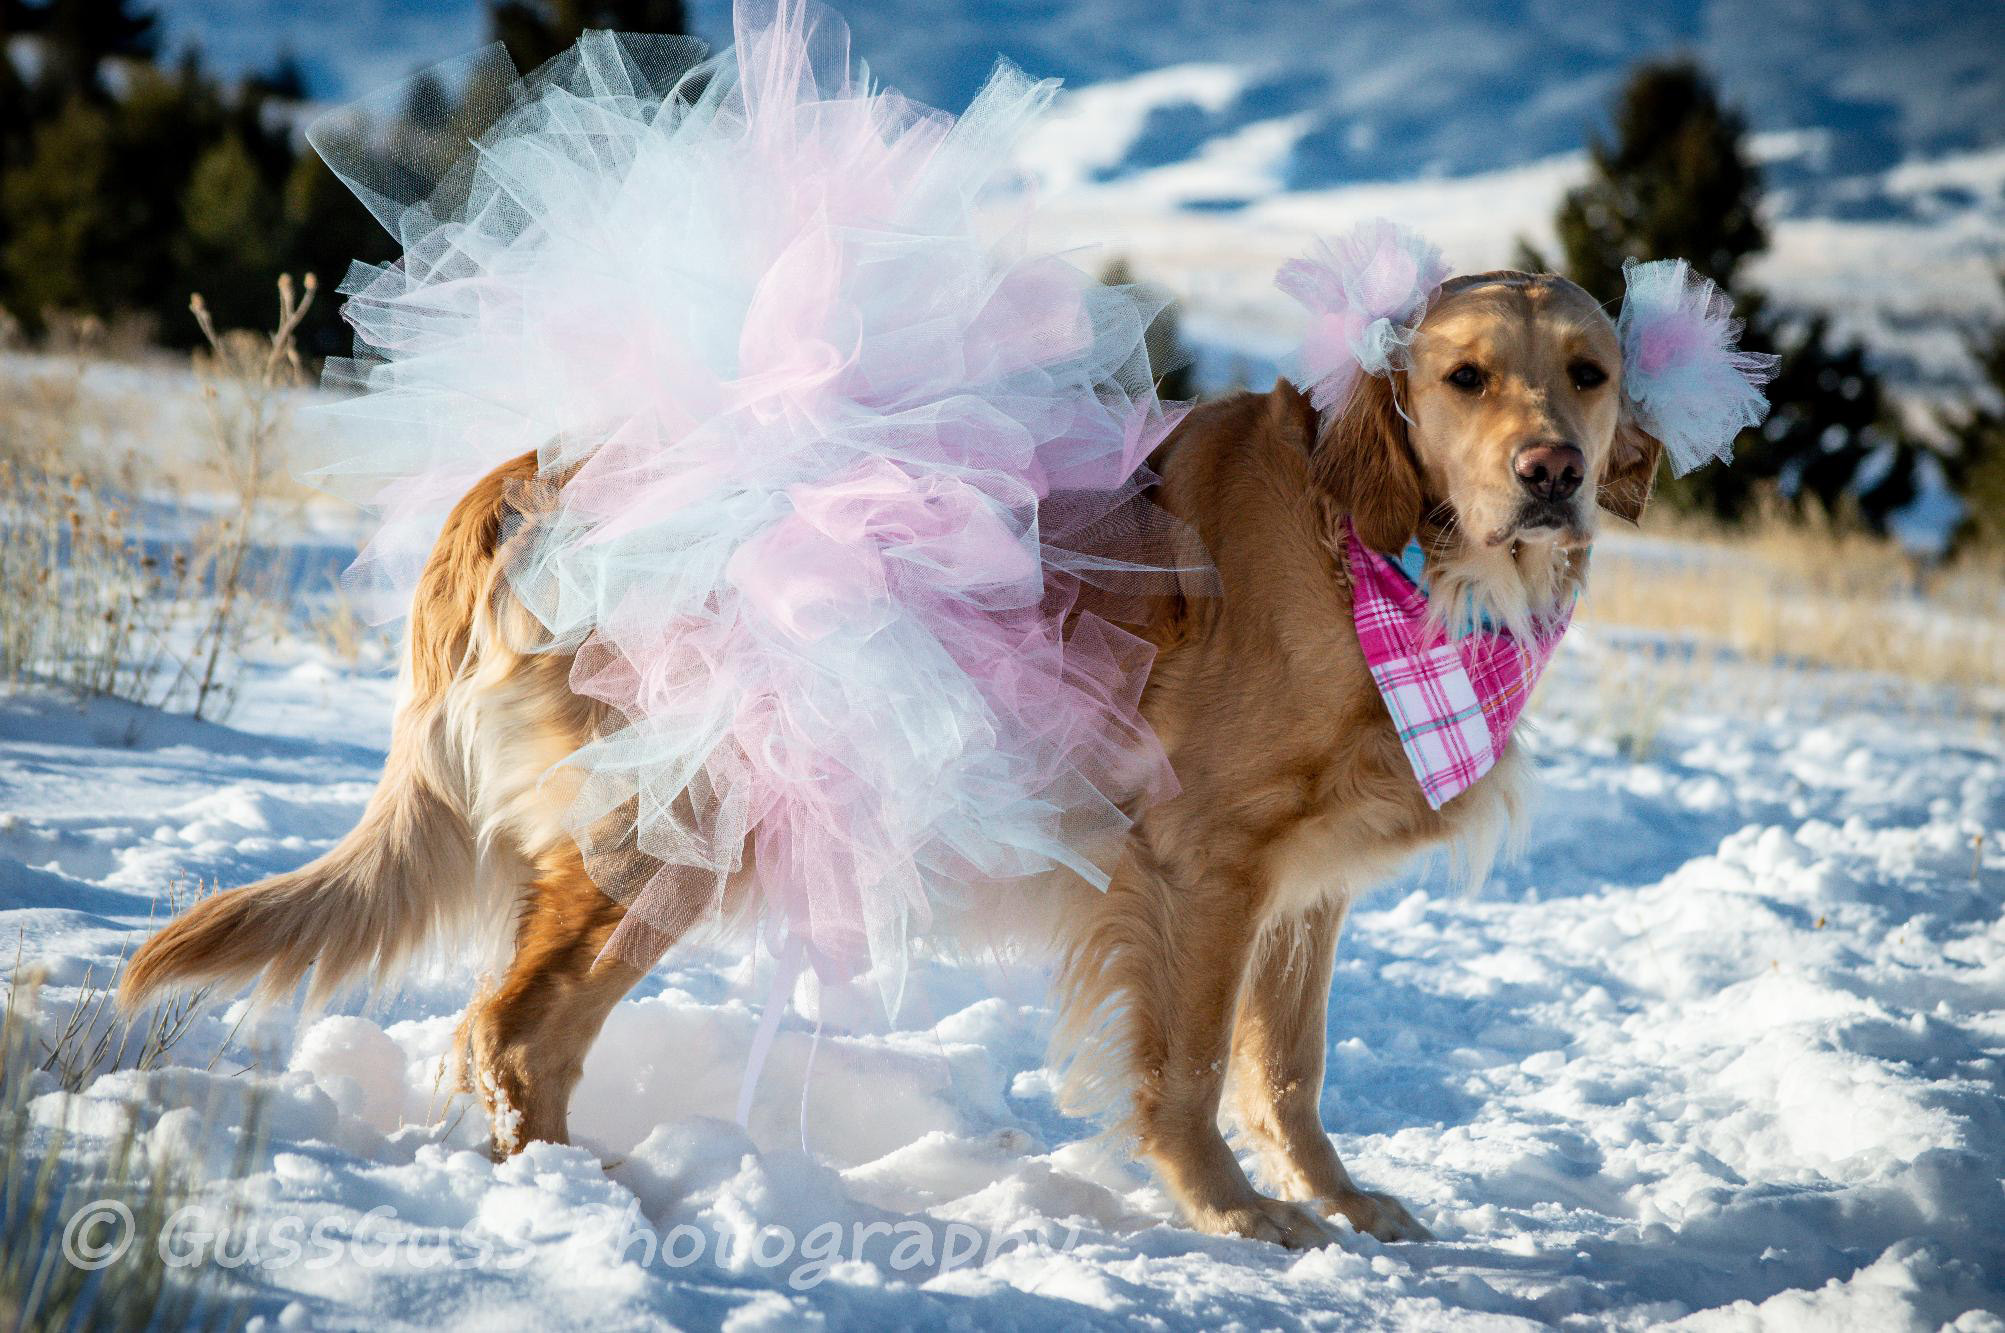 PHOTO: Kodie first gained online attention for her sweet maternity photos snapped by her owner, Chelsie Garrels of Montana.